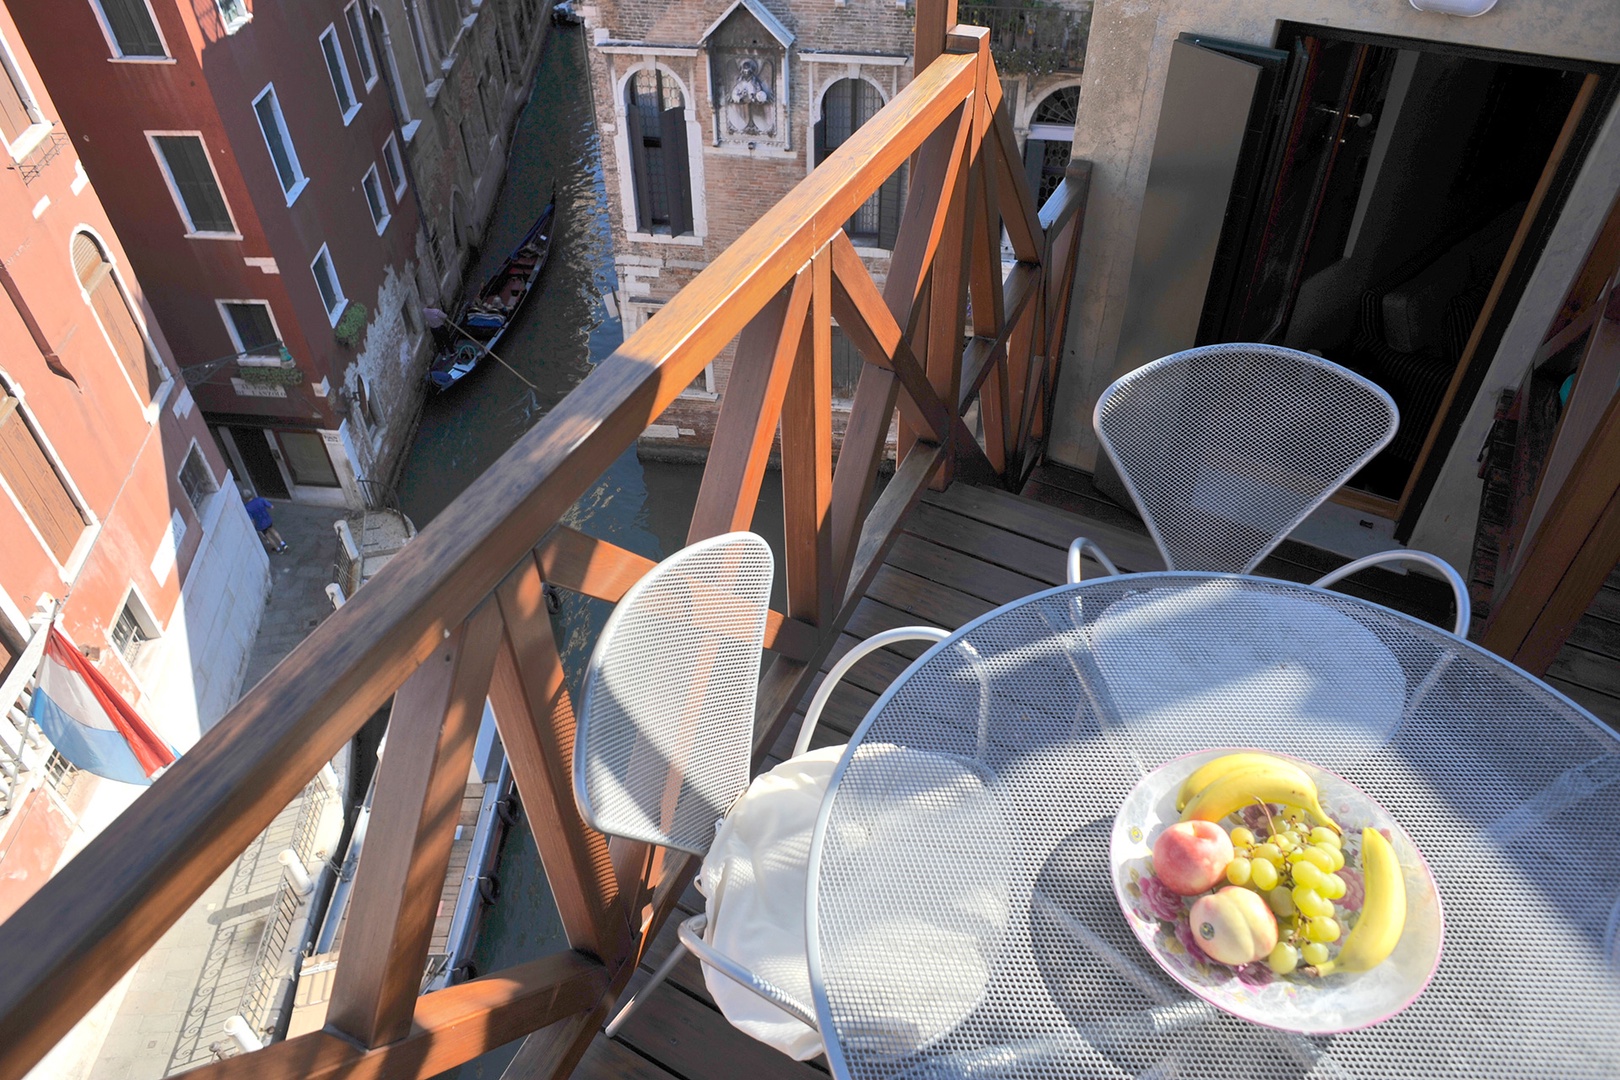 A table on the terrace welcomes dining al fresco while enjoying the view.